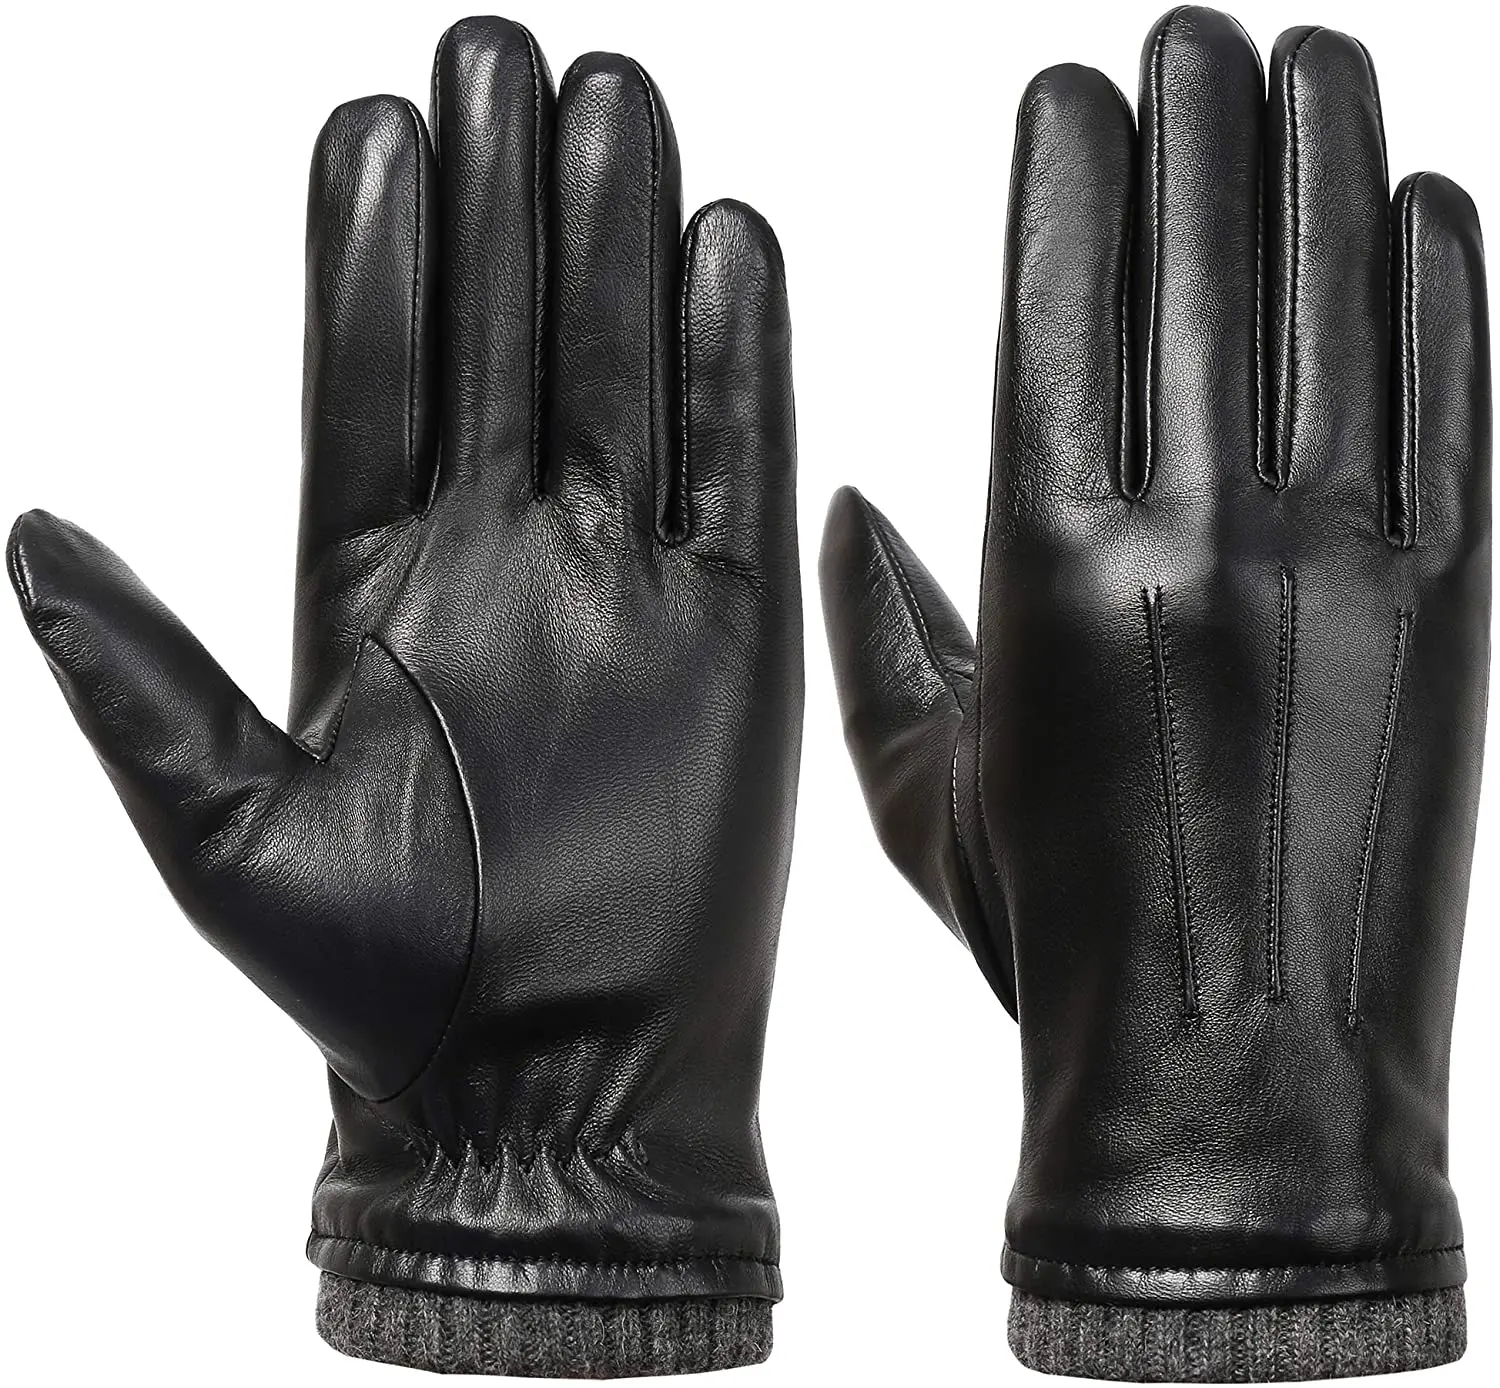 Men's Dress Driving Genuine Sheep Leather Unlined Gloves